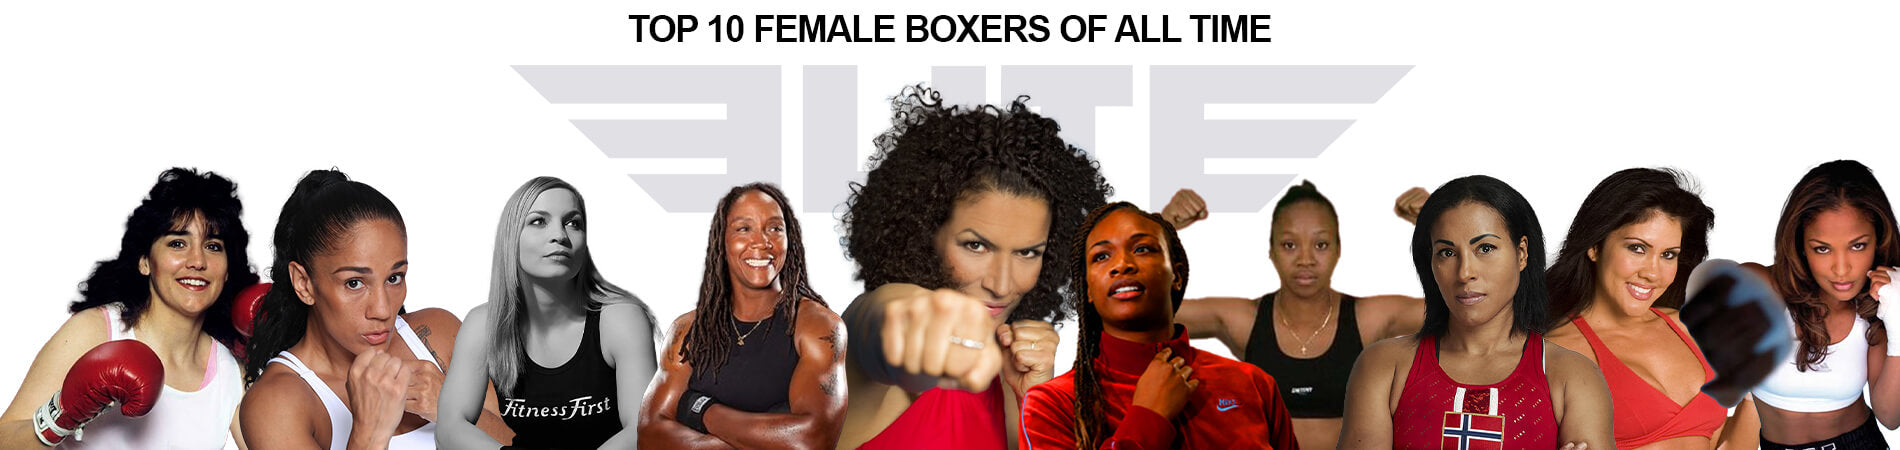 Top 10 Female Boxers of All Time